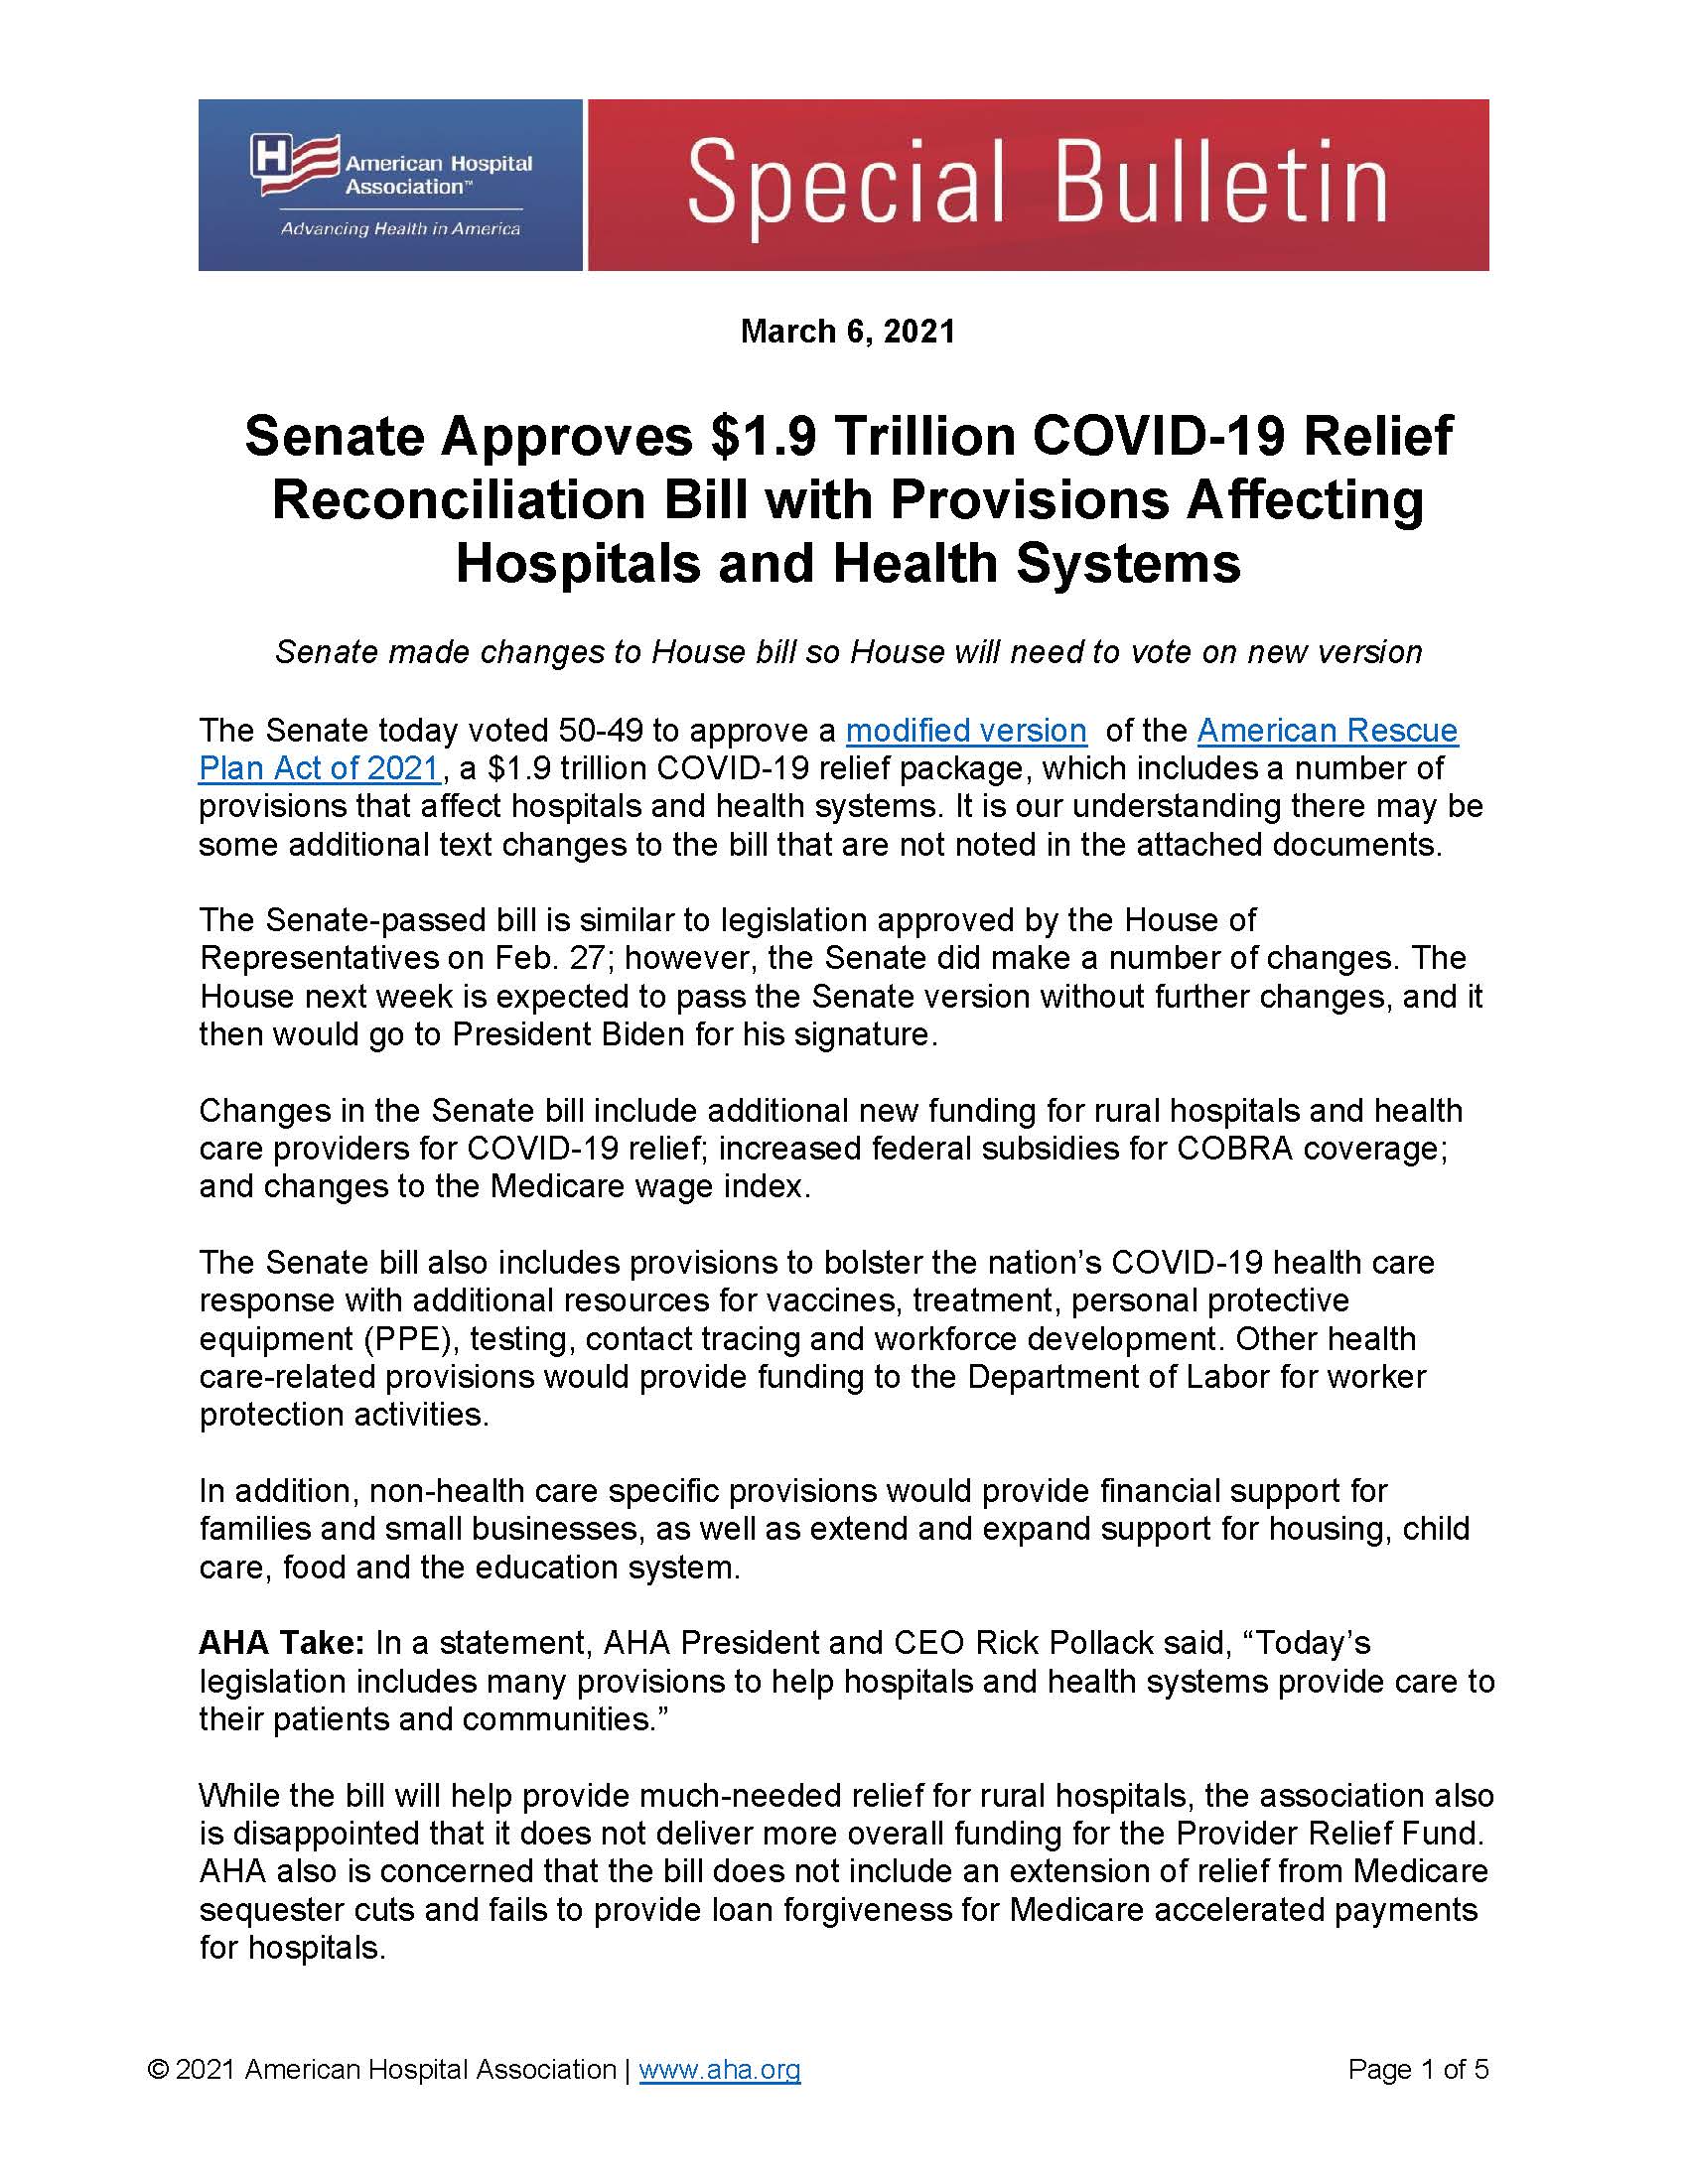 Special Bulletin: Senate Approves $1.9 Trillion COVID-19 Relief Reconciliation Bill with Provisions Affecting Hospitals and Health Systems. March 6, 2021. Page 1.